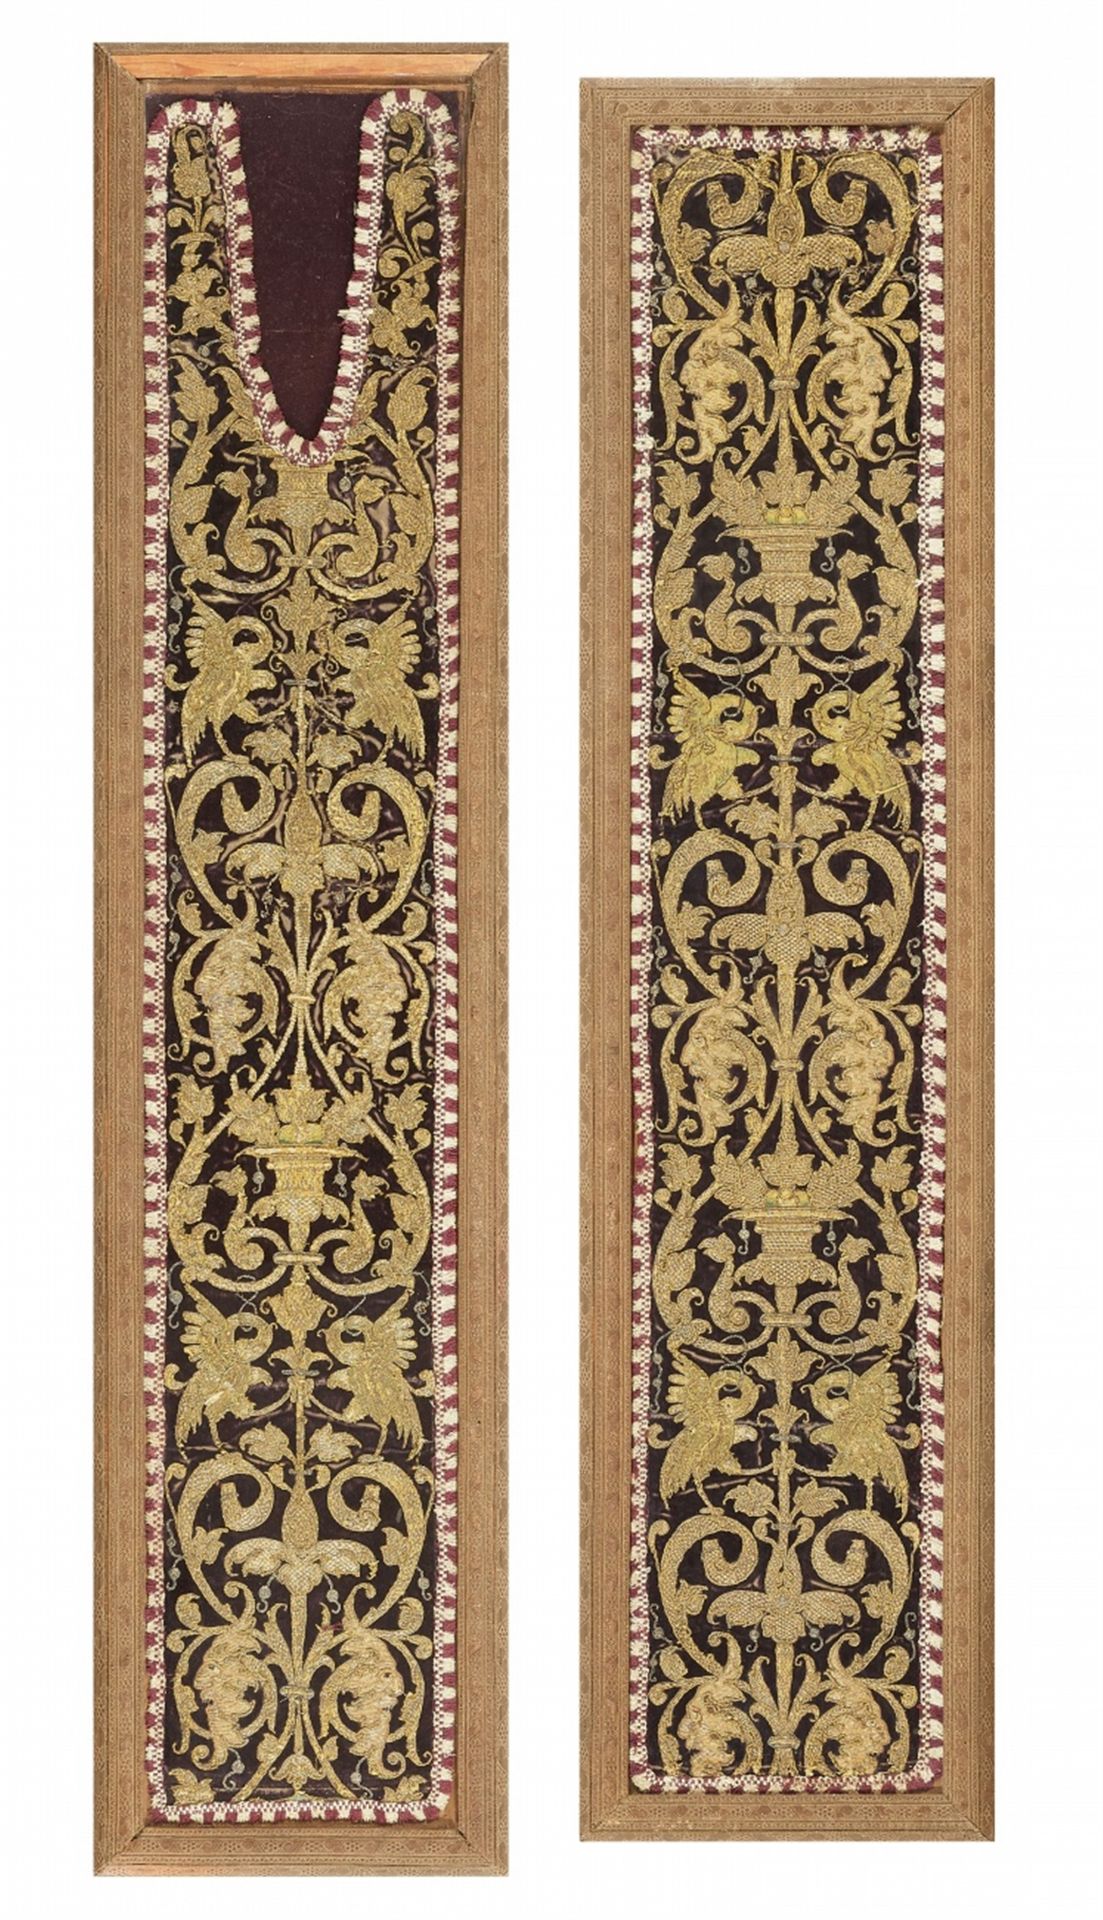 Two embroidered borders from a liturgical vestment